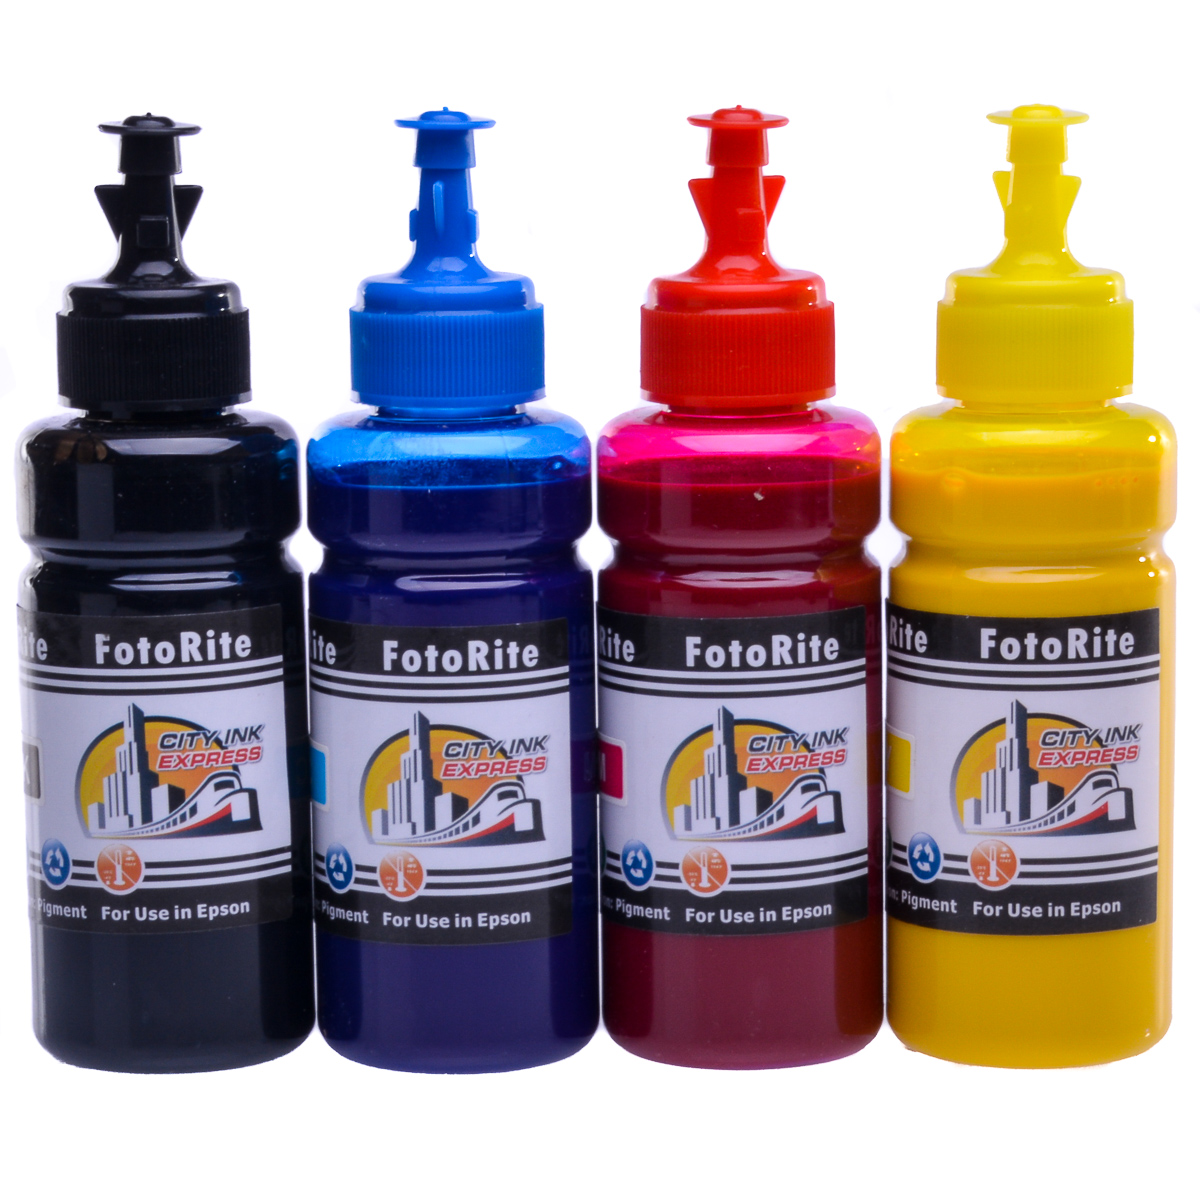 Cheap Multipack pigment ink refill replaces Epson WF-2820DWF